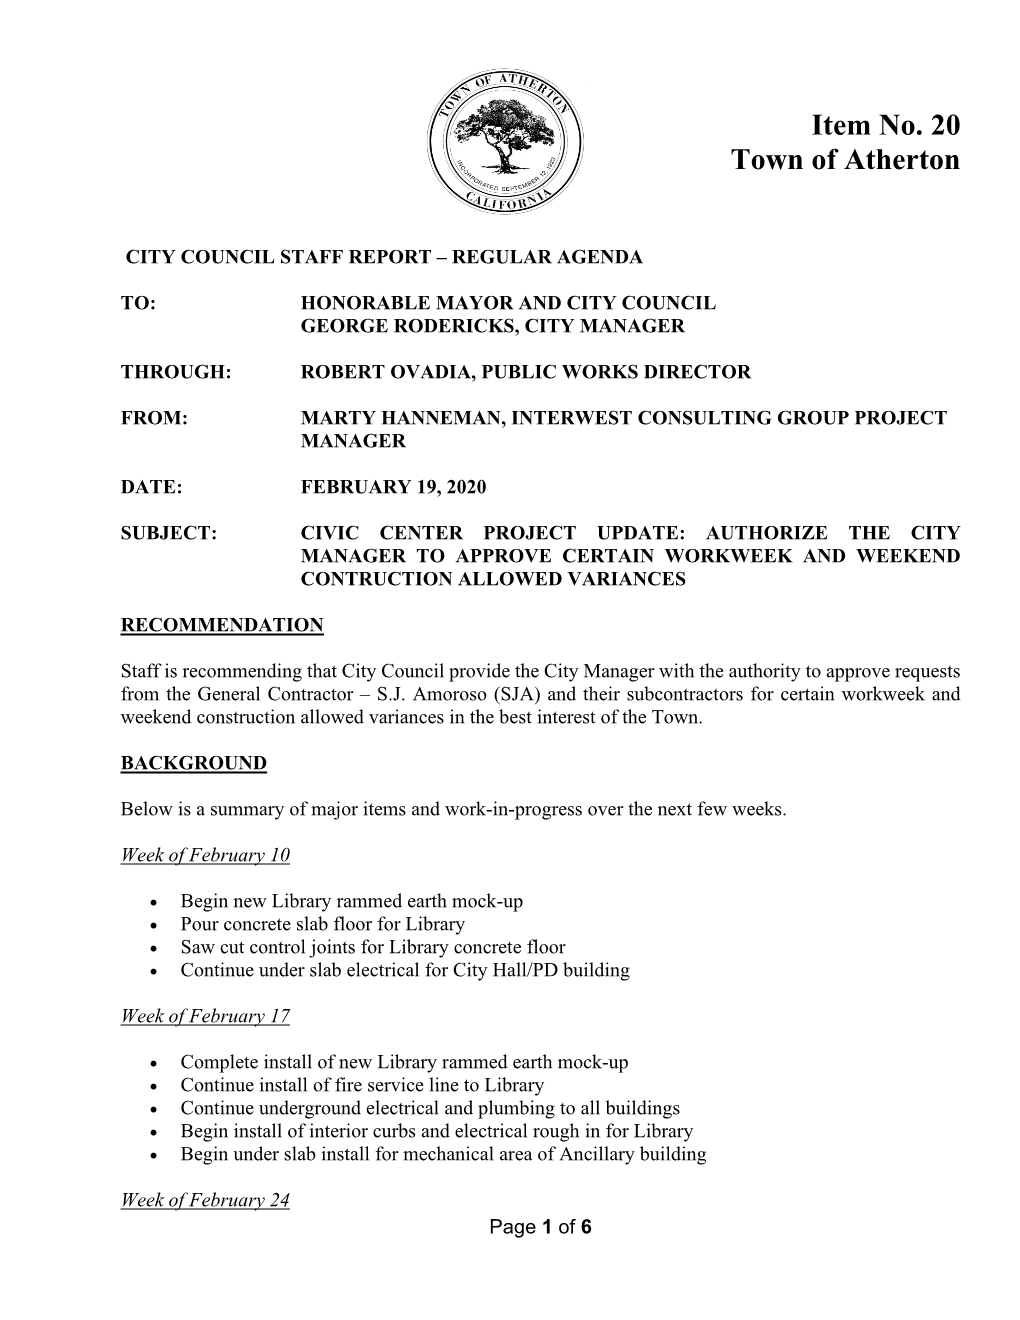 February 19, 2020 Civic Center Project Update: Authorize the City Manager to Approve Certain Workweek